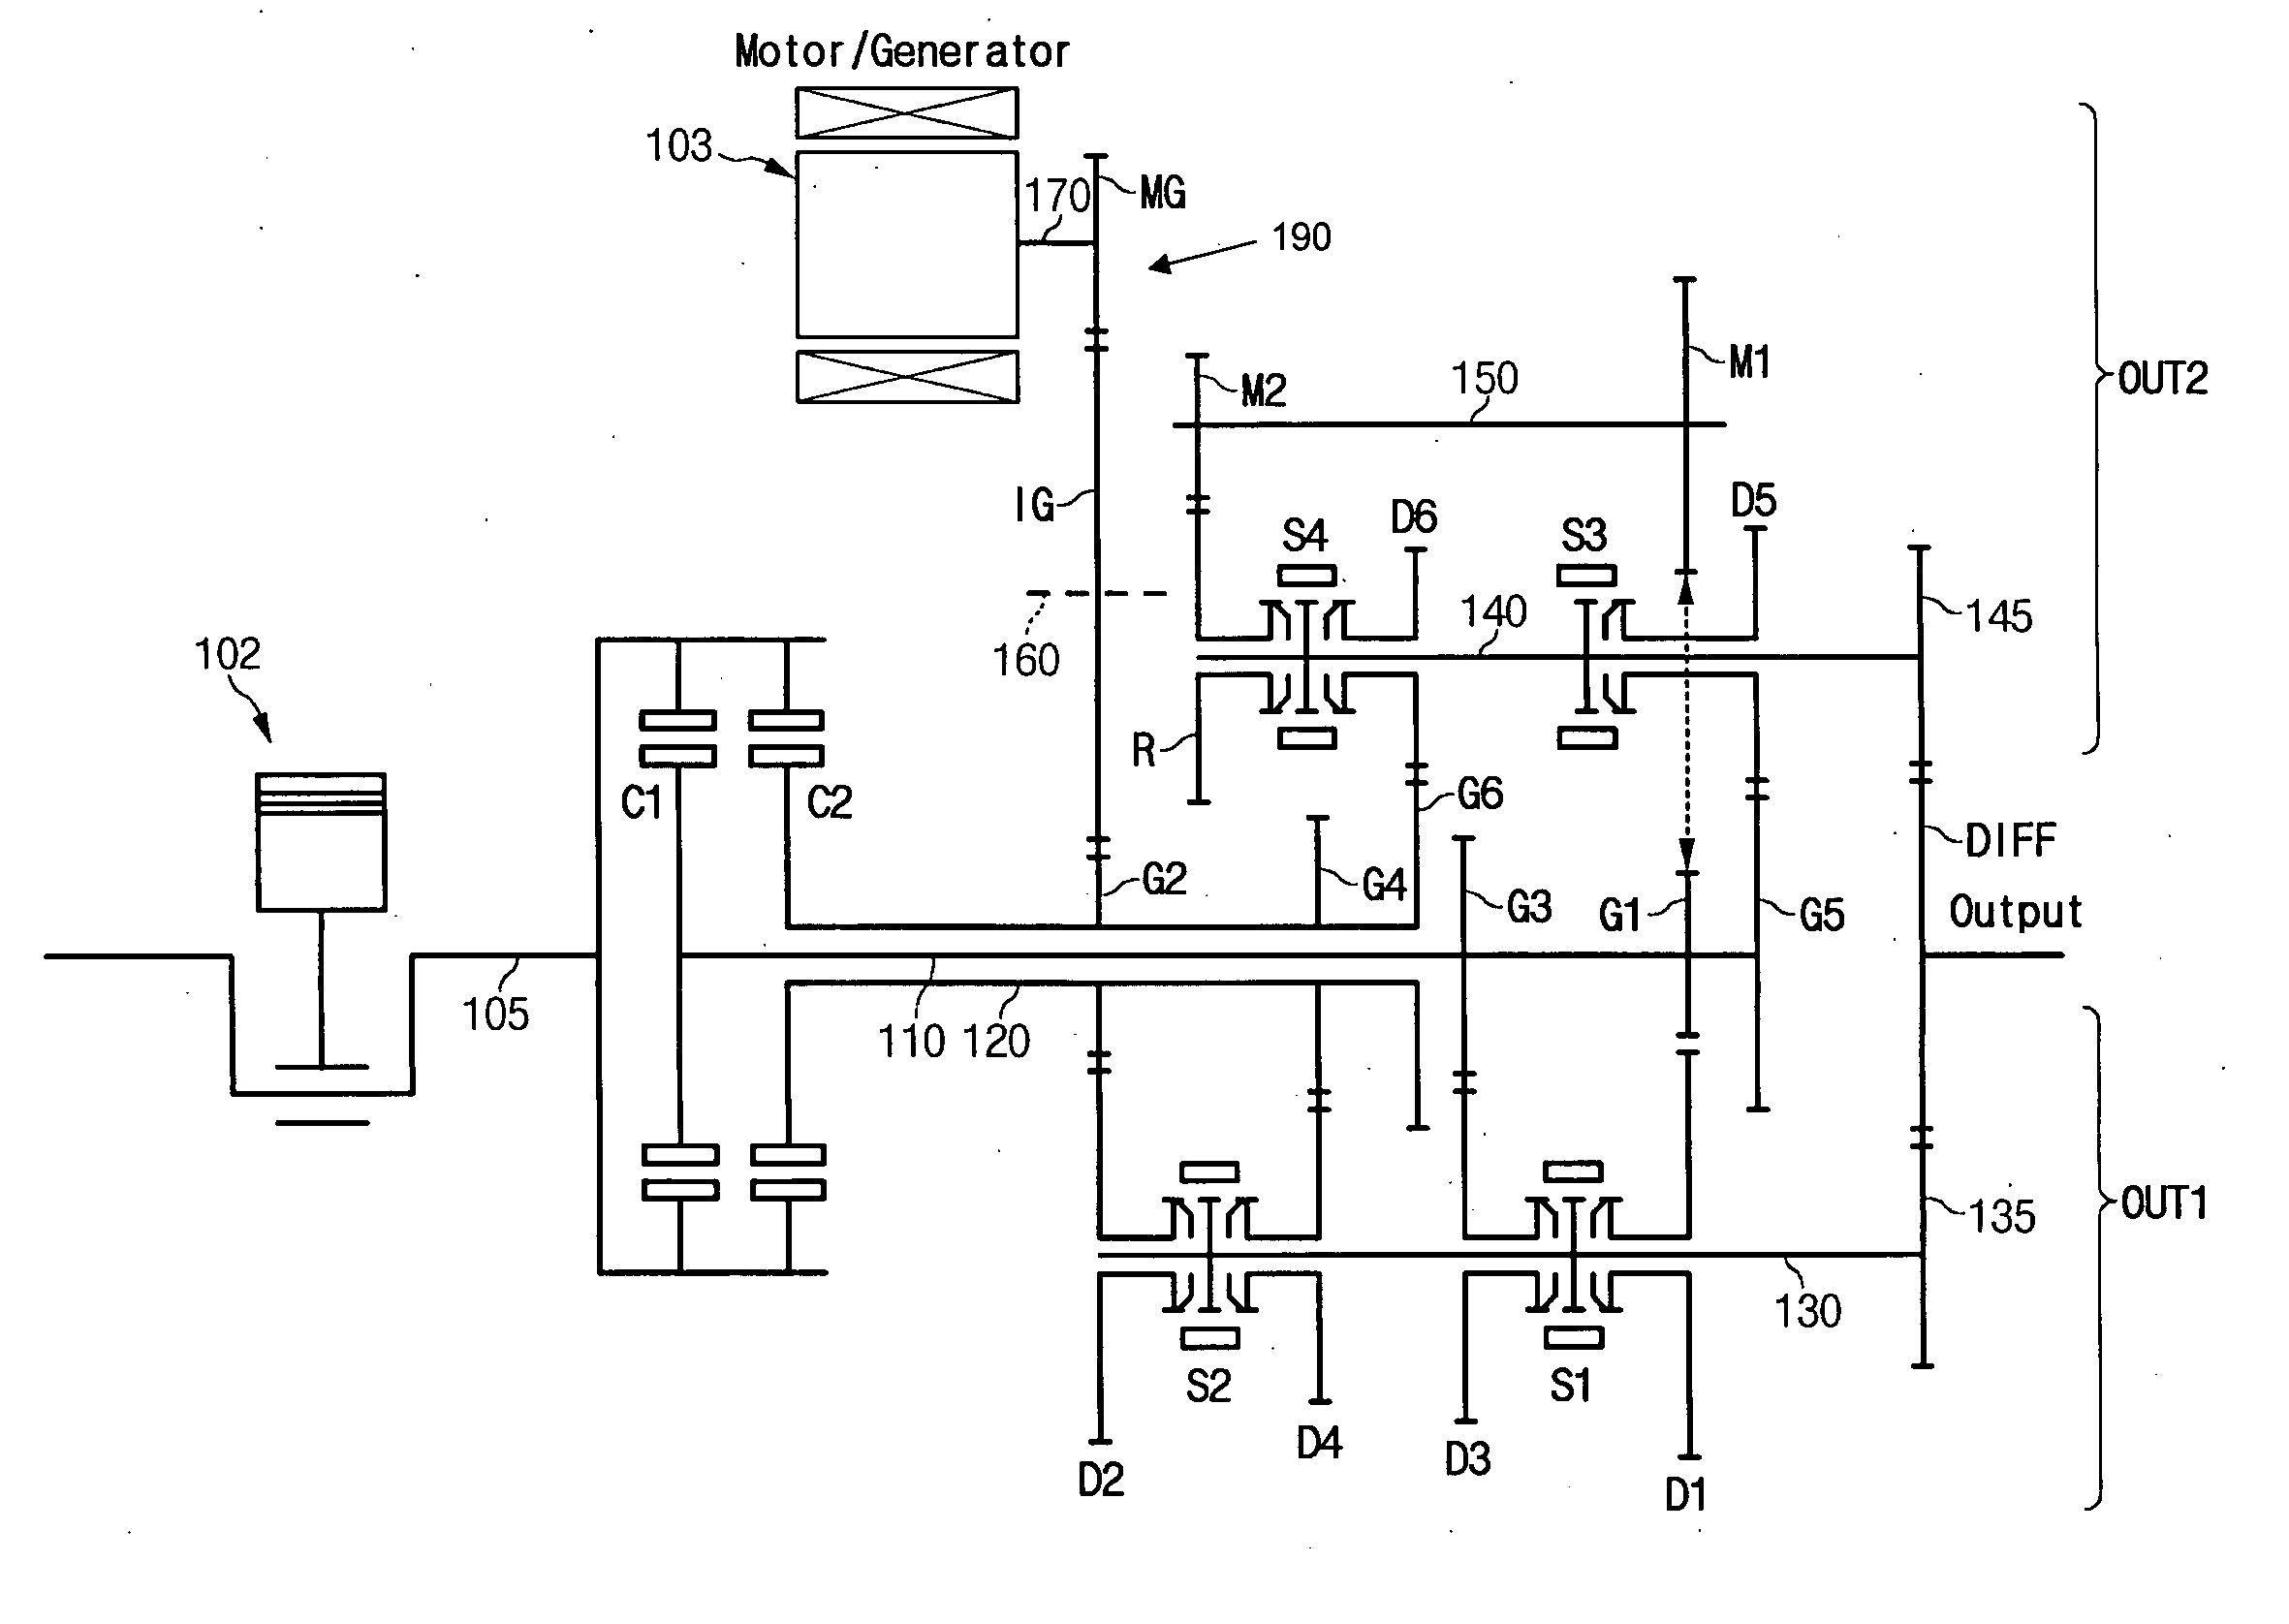 Double clutch transmission for a hybrid electric vehicle and method for operating the same